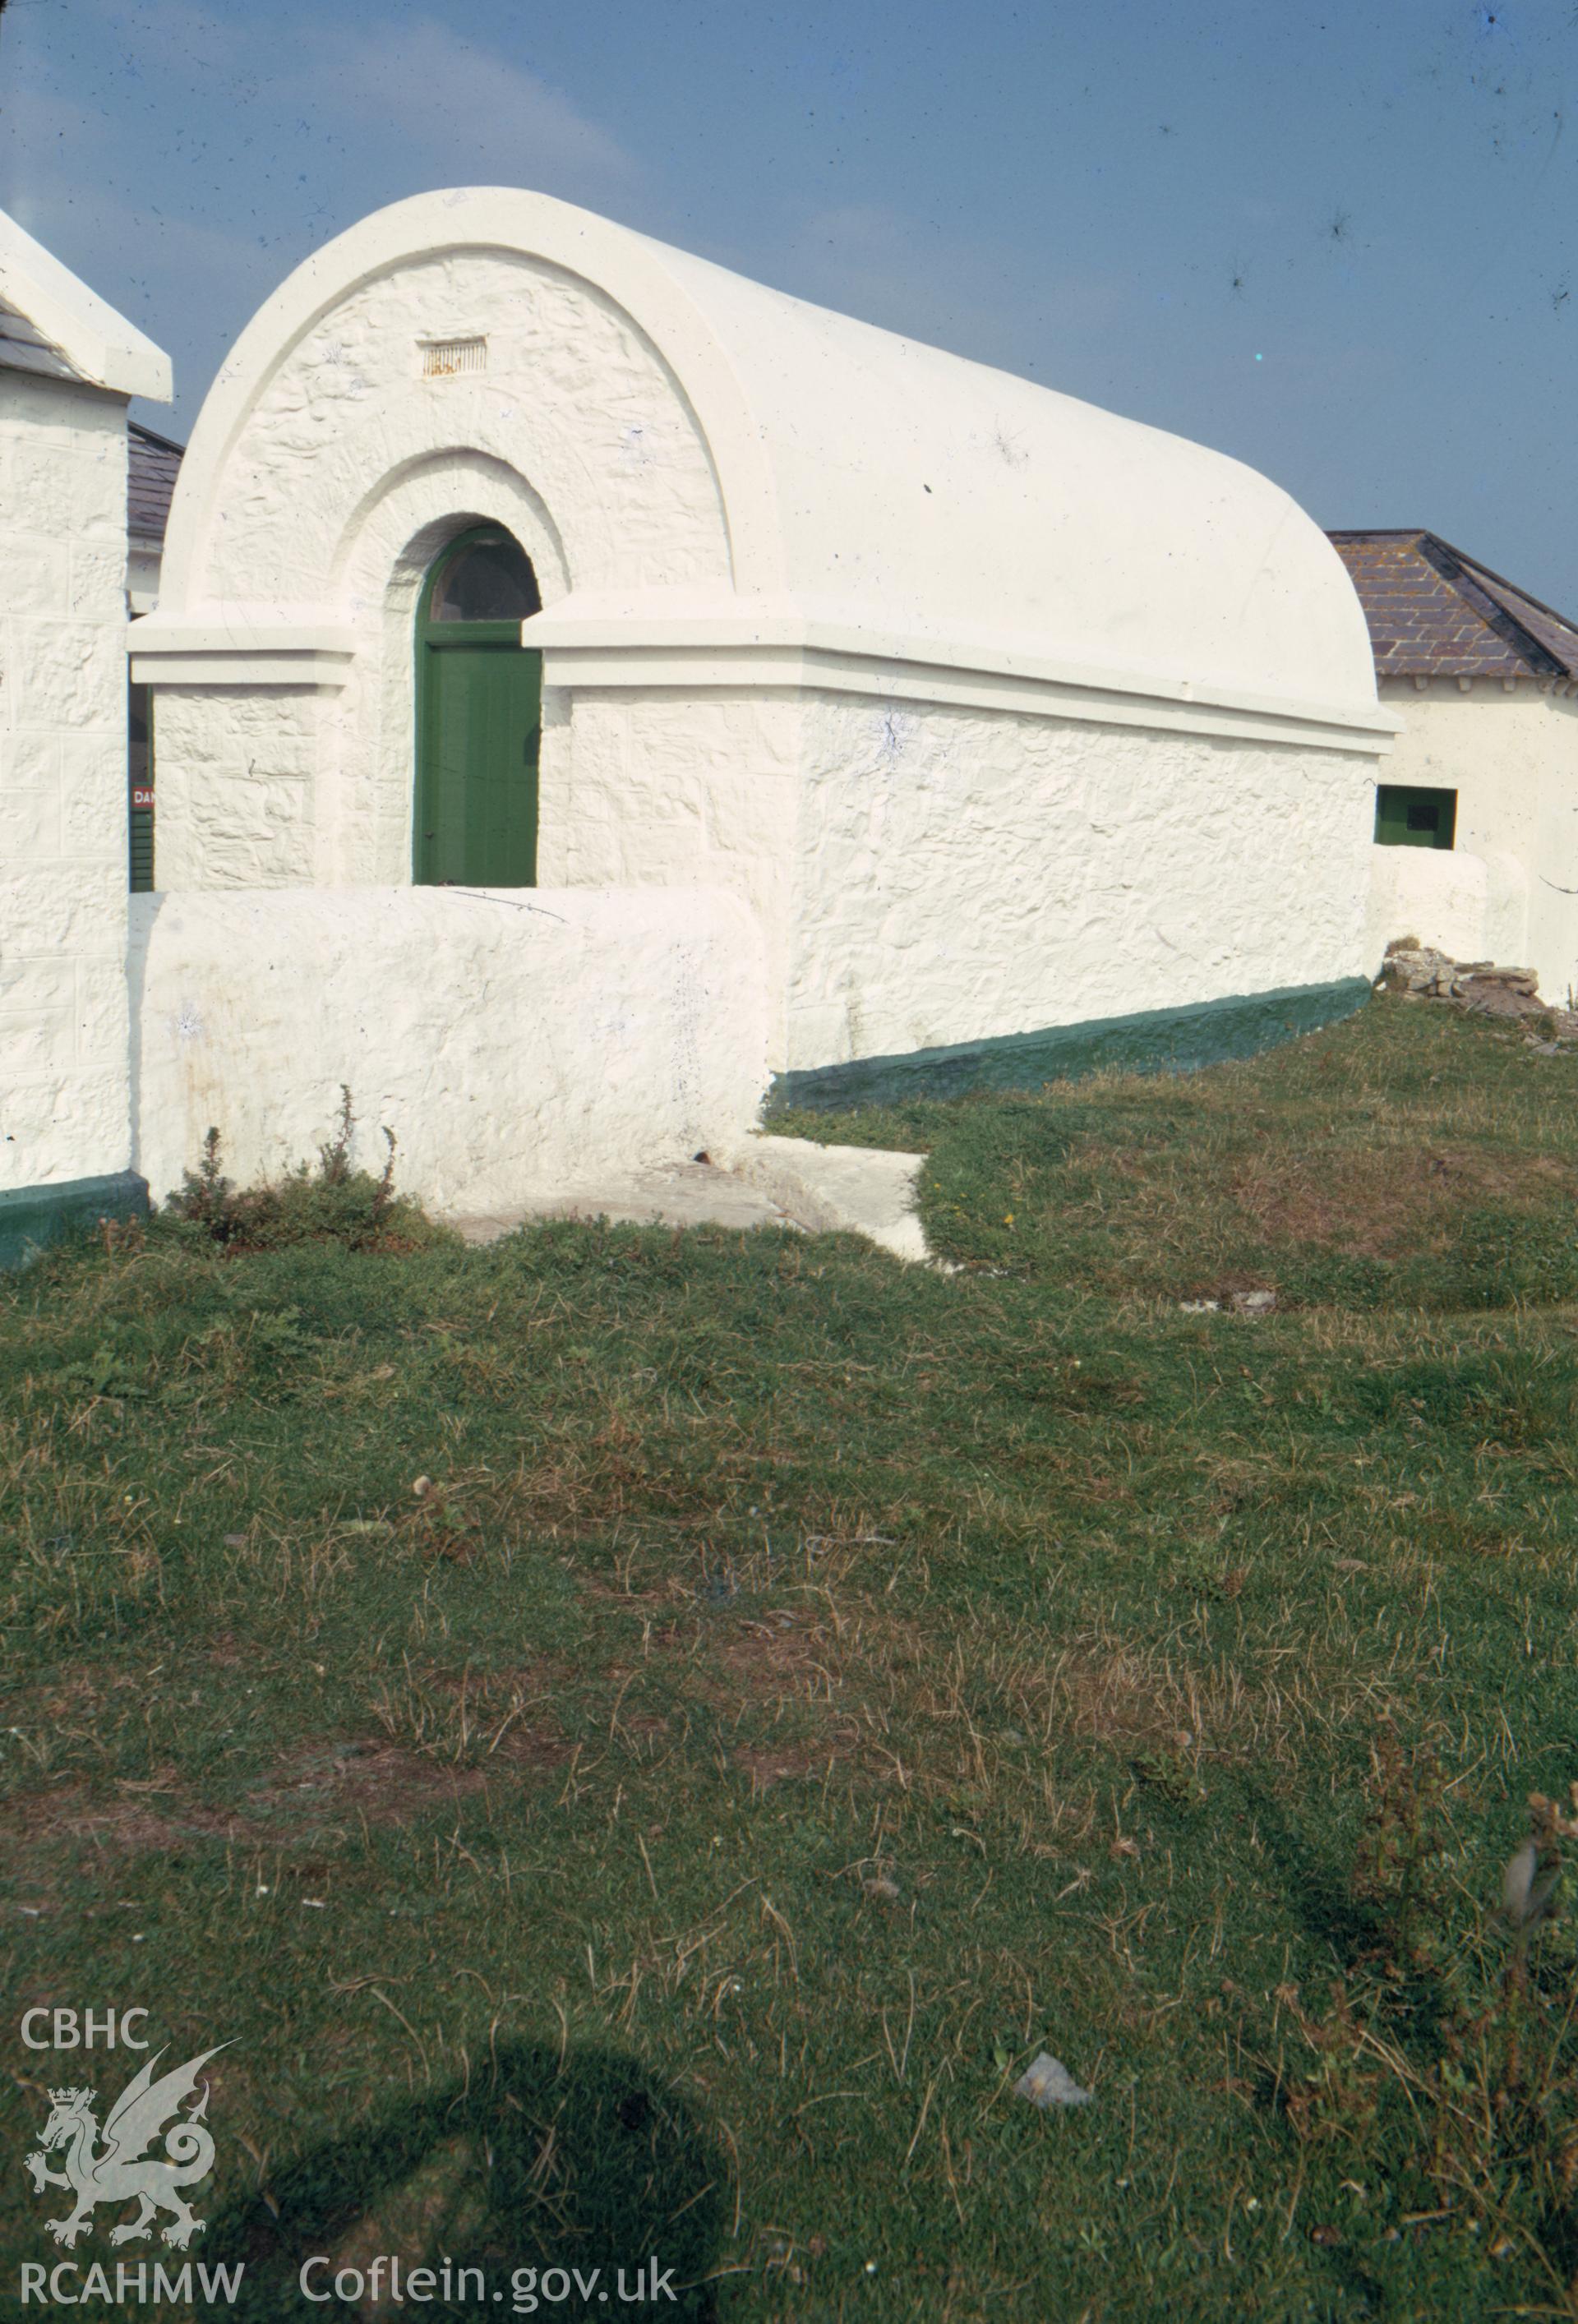 Colour slide showing exterior view of the ninetennth-century vaulted oil store or magazine at Bardsey Lighthouse.